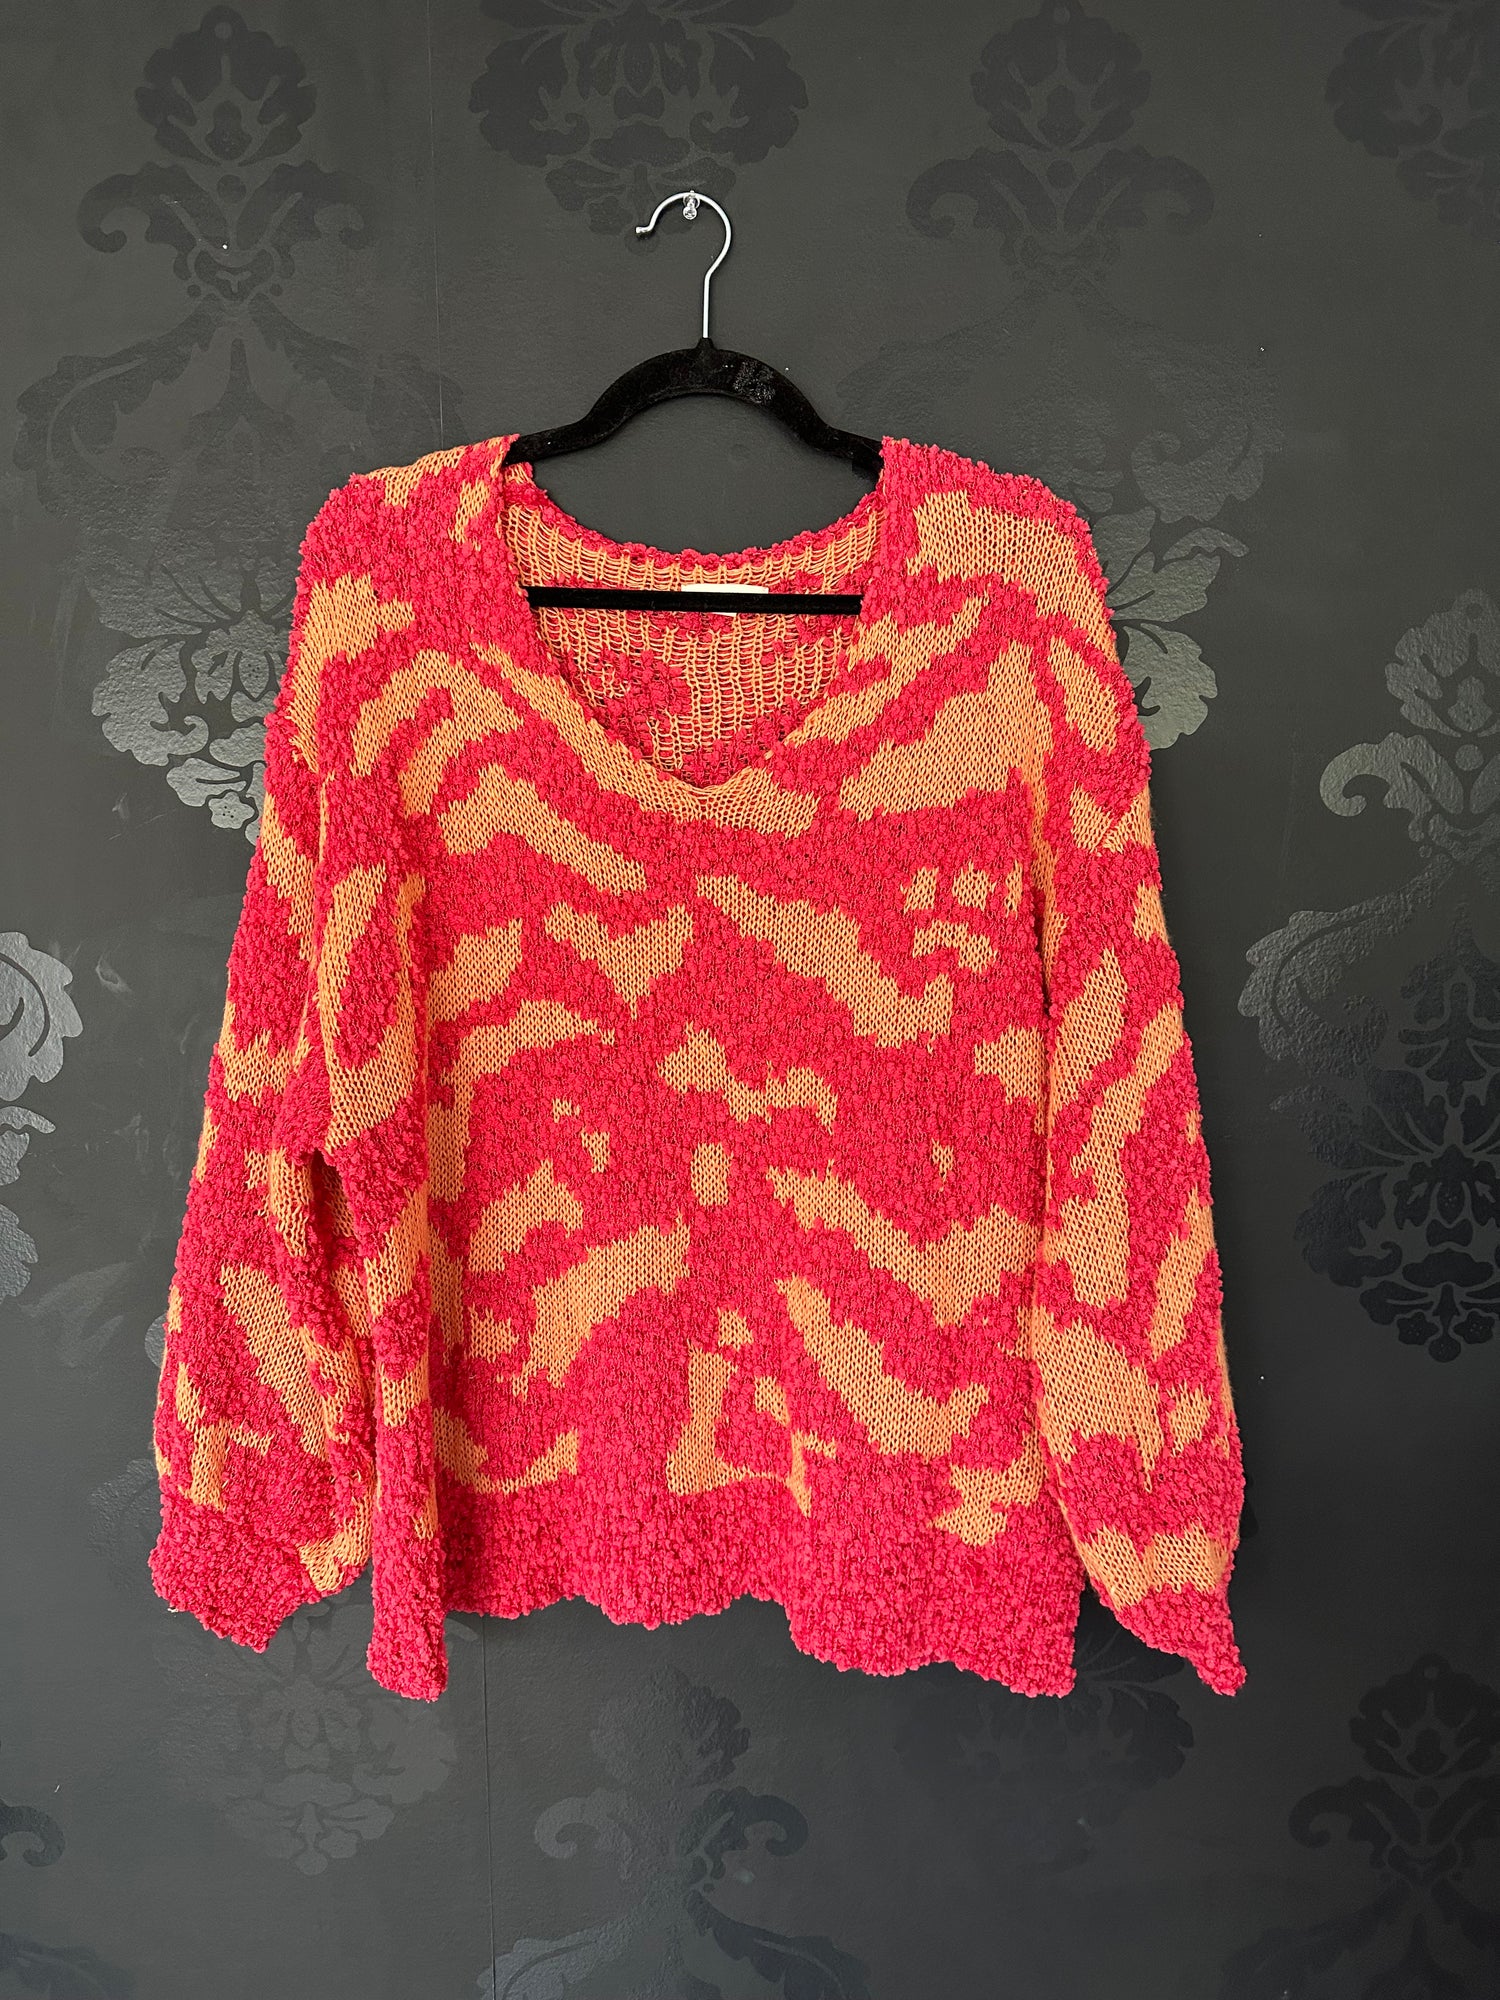 Size S/M Two-Toned Animal Print Popcorn Knit Sweater